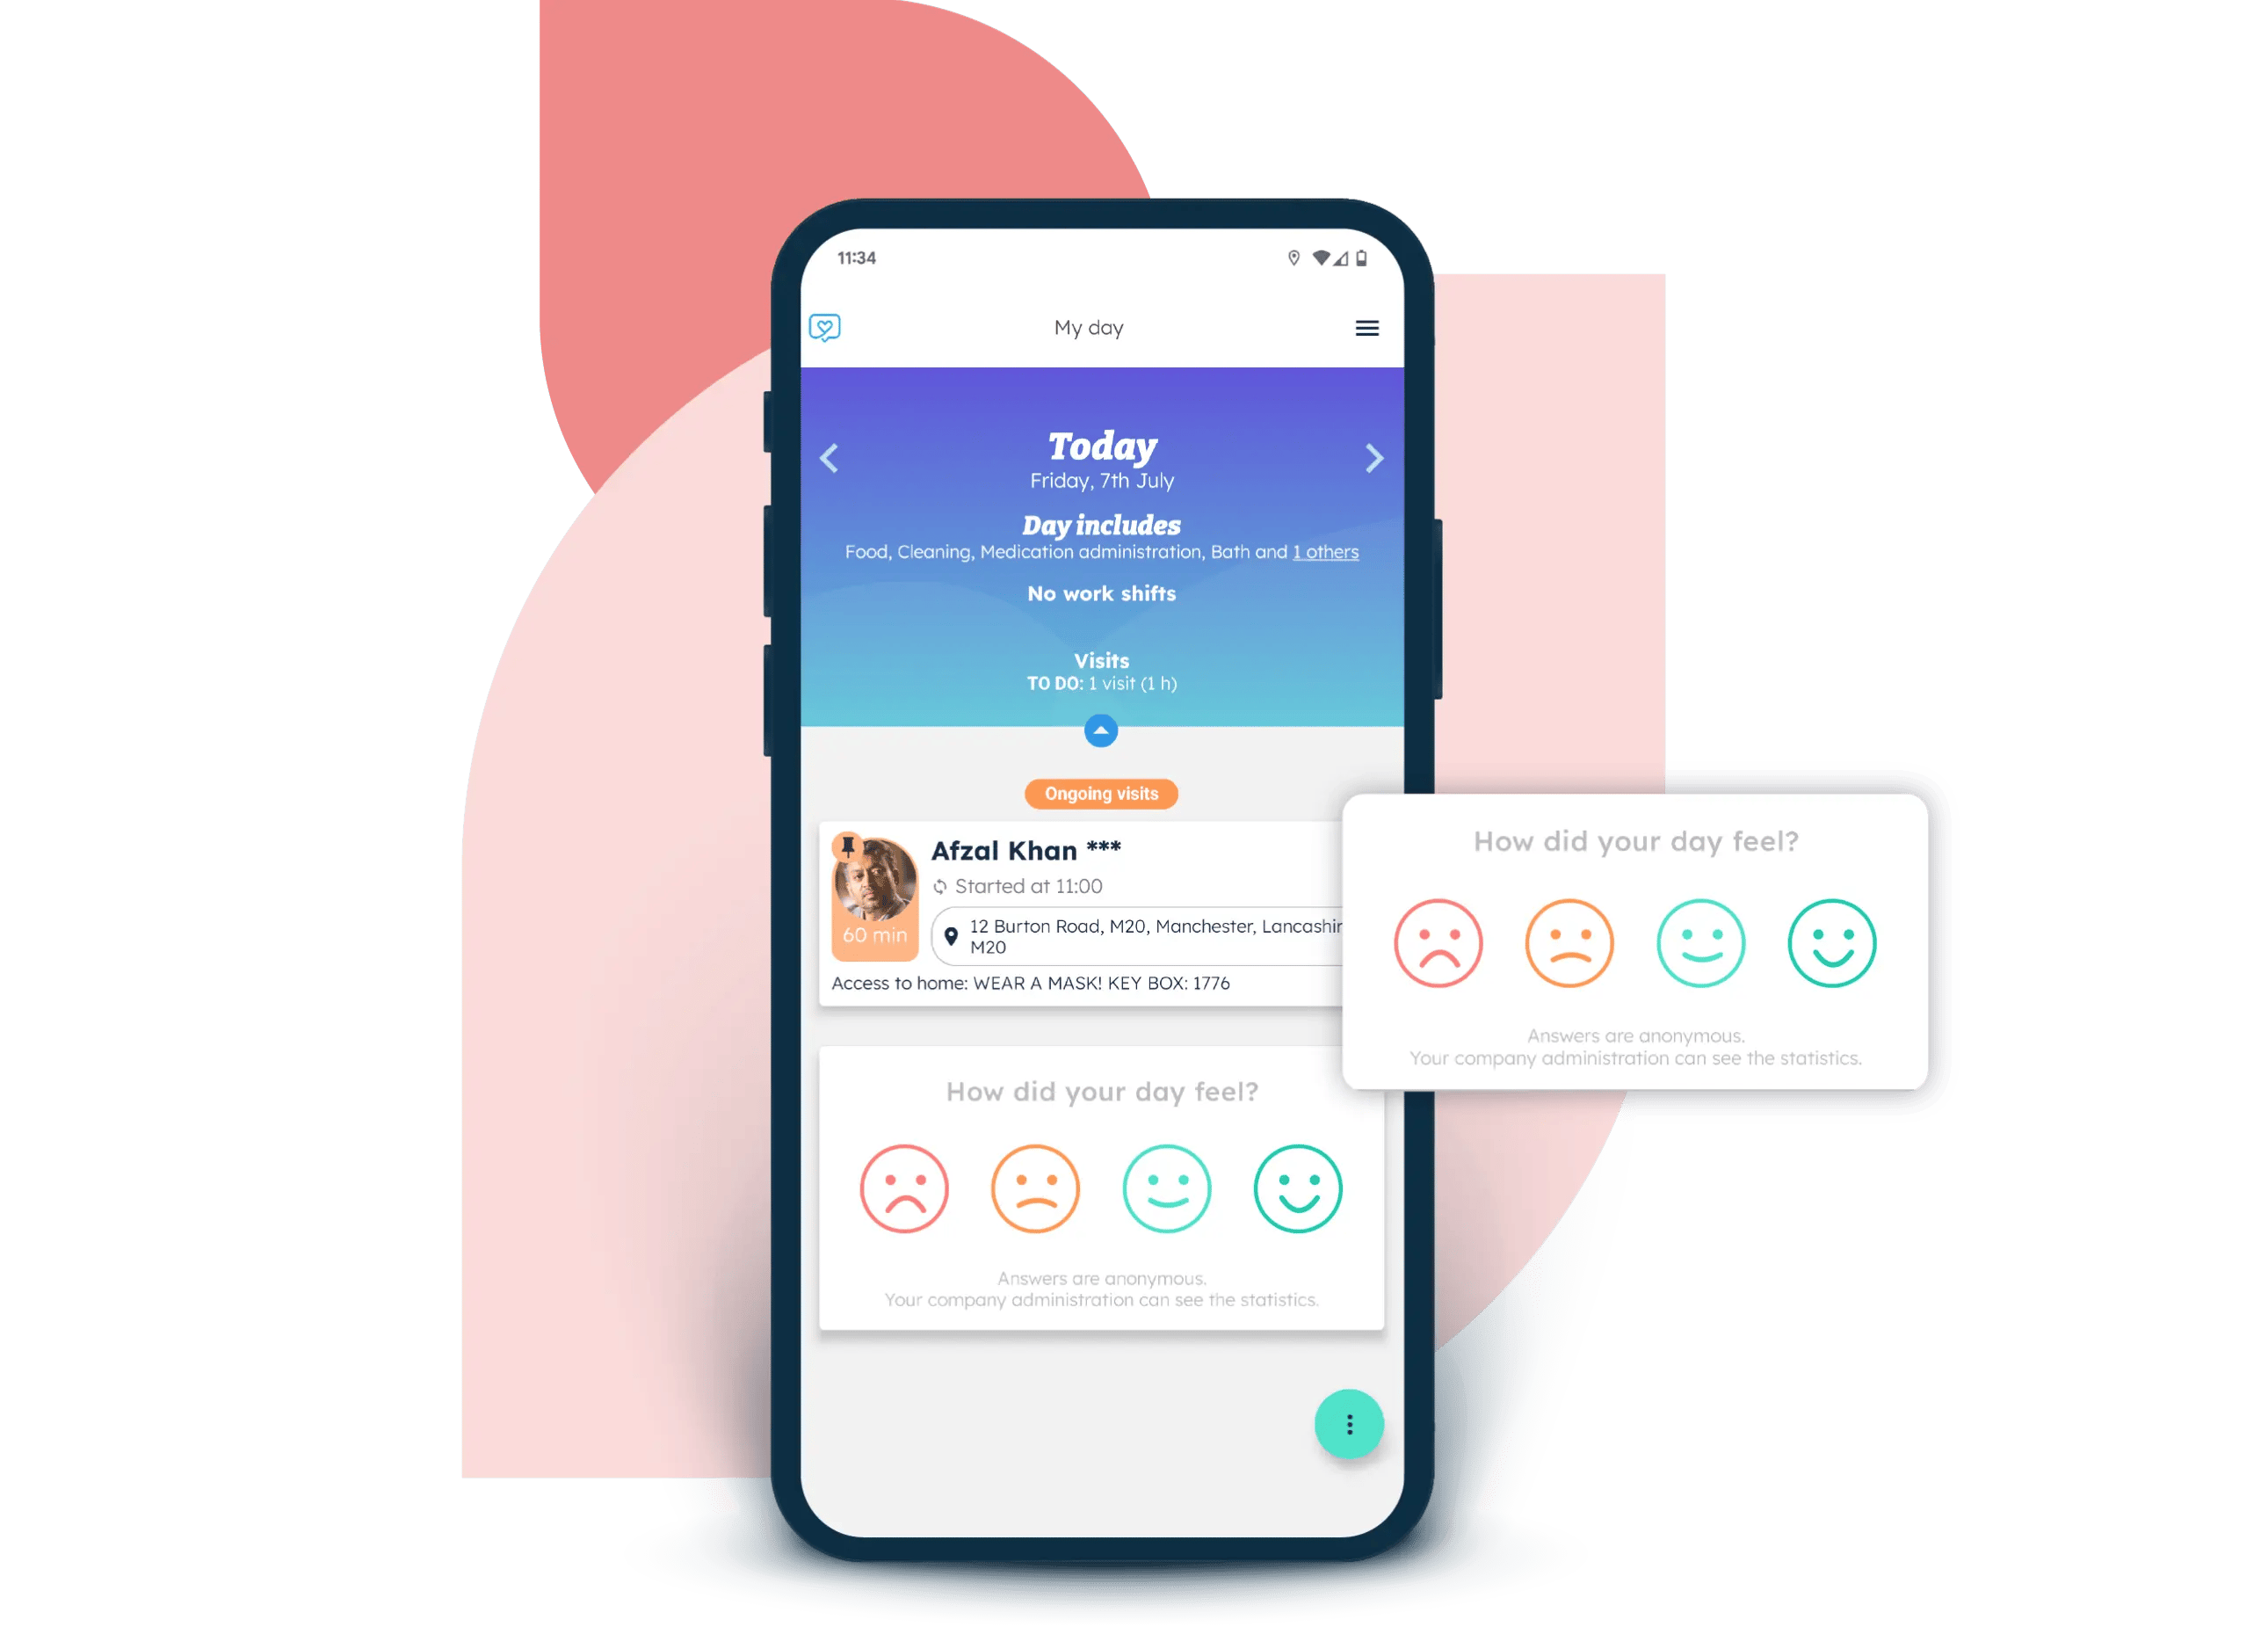 Carer wellbeing survey within the Nursebuddy mobile app